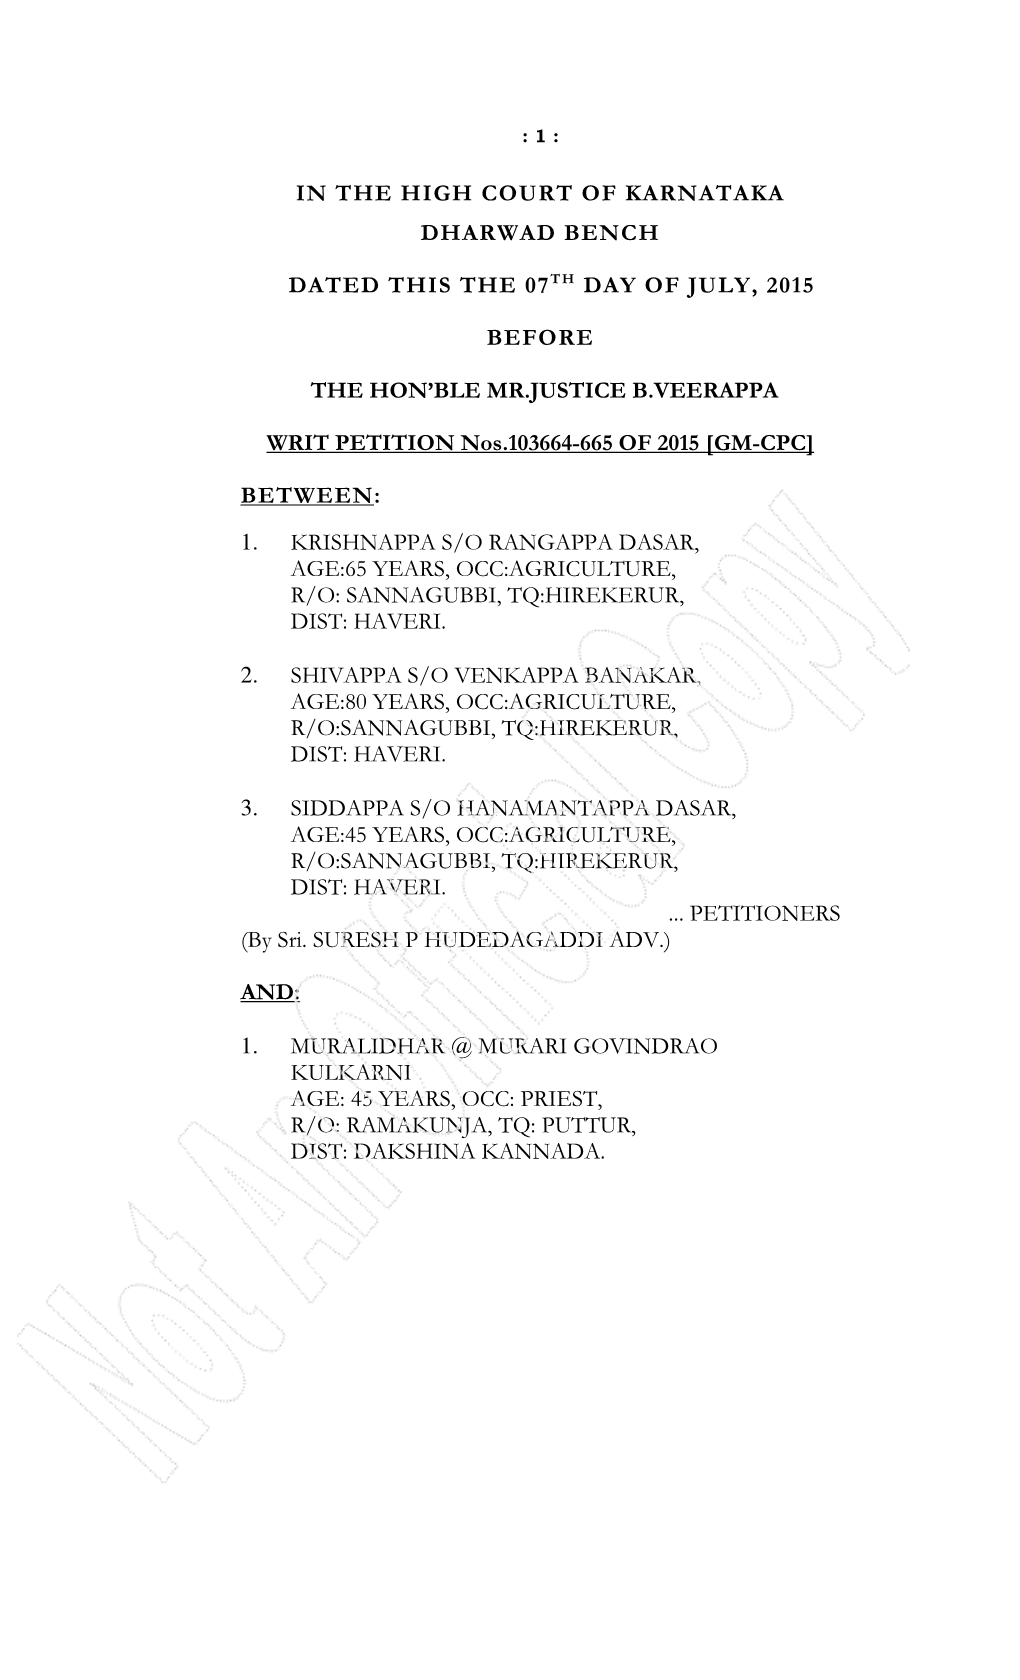 In the High Court of Karnataka Dharwad Bench Dated This the 07Th Day of July, 2015 Before the Hon'ble Mr.Justice B.Veerappa Wr